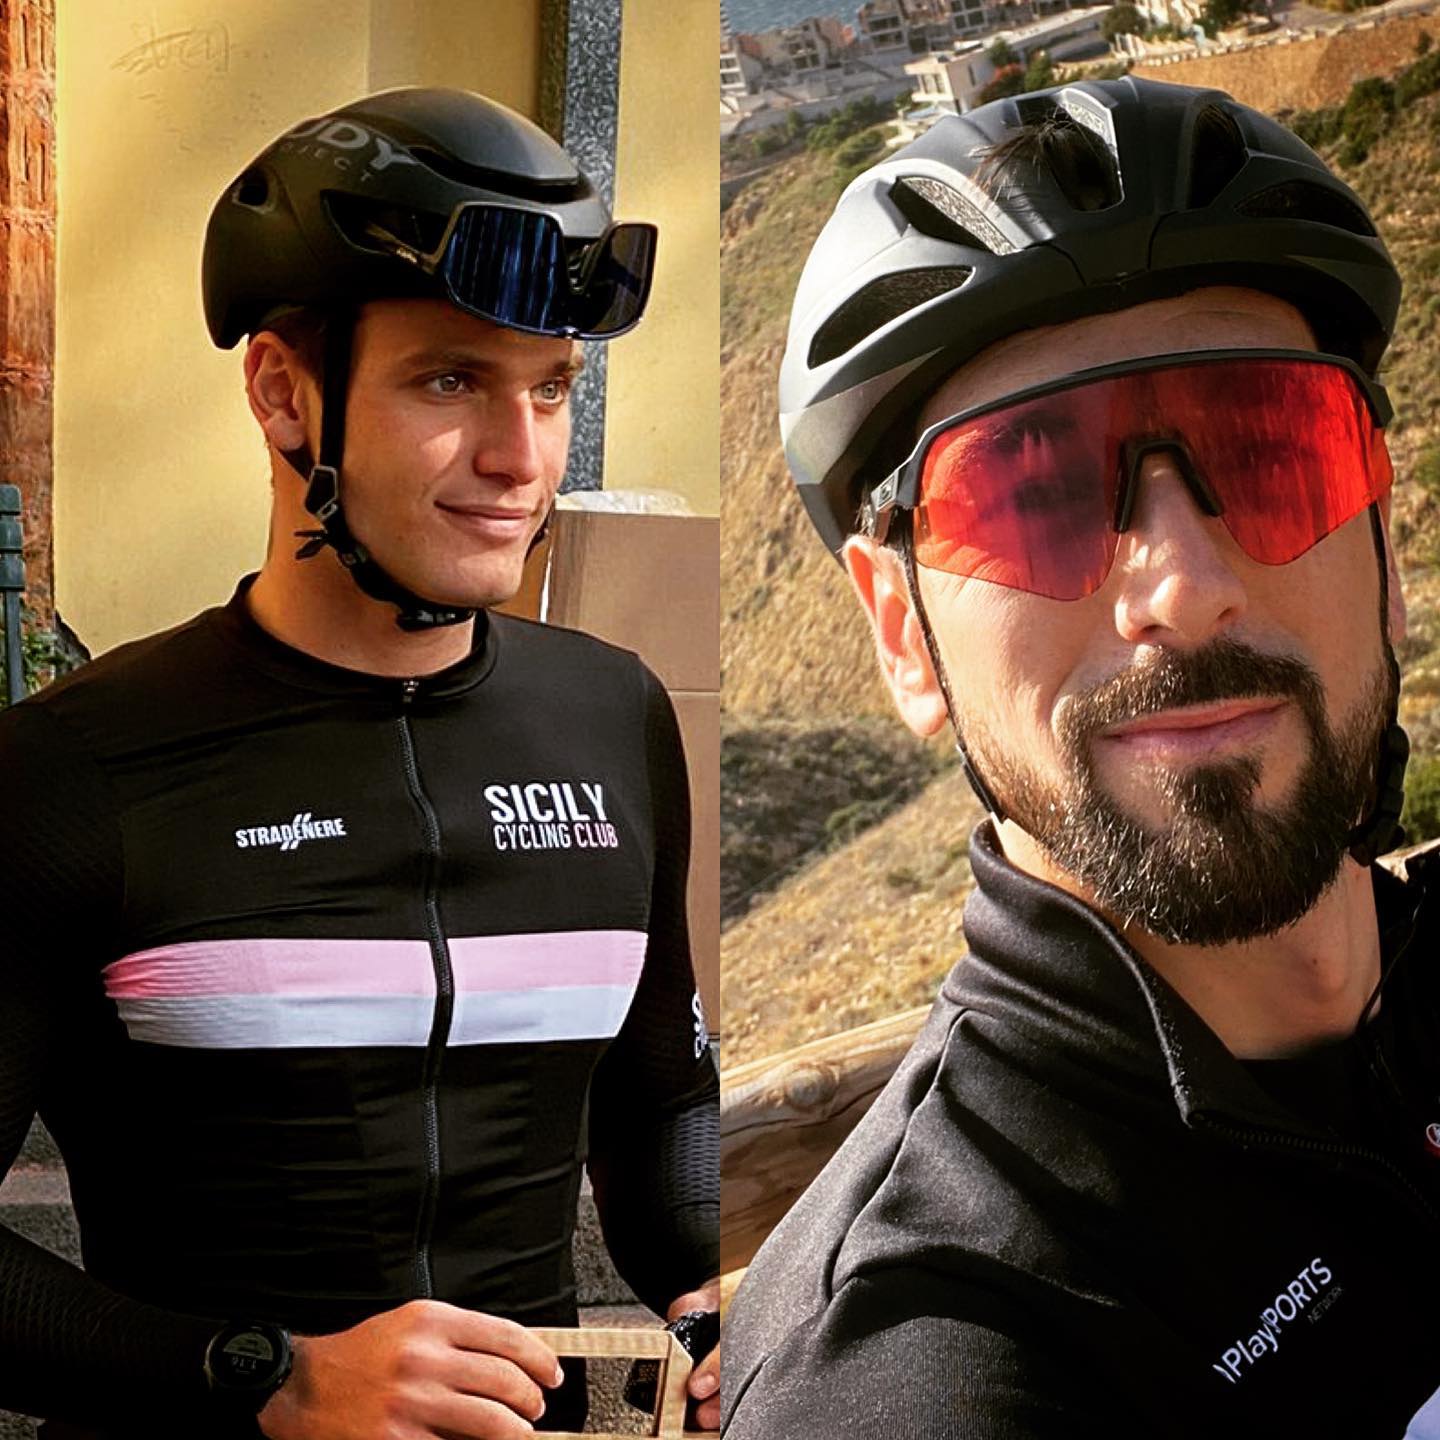 Proud of these two guys racing for us today during the traditional Trofeo Sant’Agata. 
@antoniolimoli was 8th overall and first of his age group! 
The other one, @florian.chabbal, you maybe all know because he is the face of @gcnenfrancais. Most of all he is a nice guy who loves Sicily and lives in Catania.

#sicilycycling @strade_nere #stradenere #cyclinginsicily #travelsicily